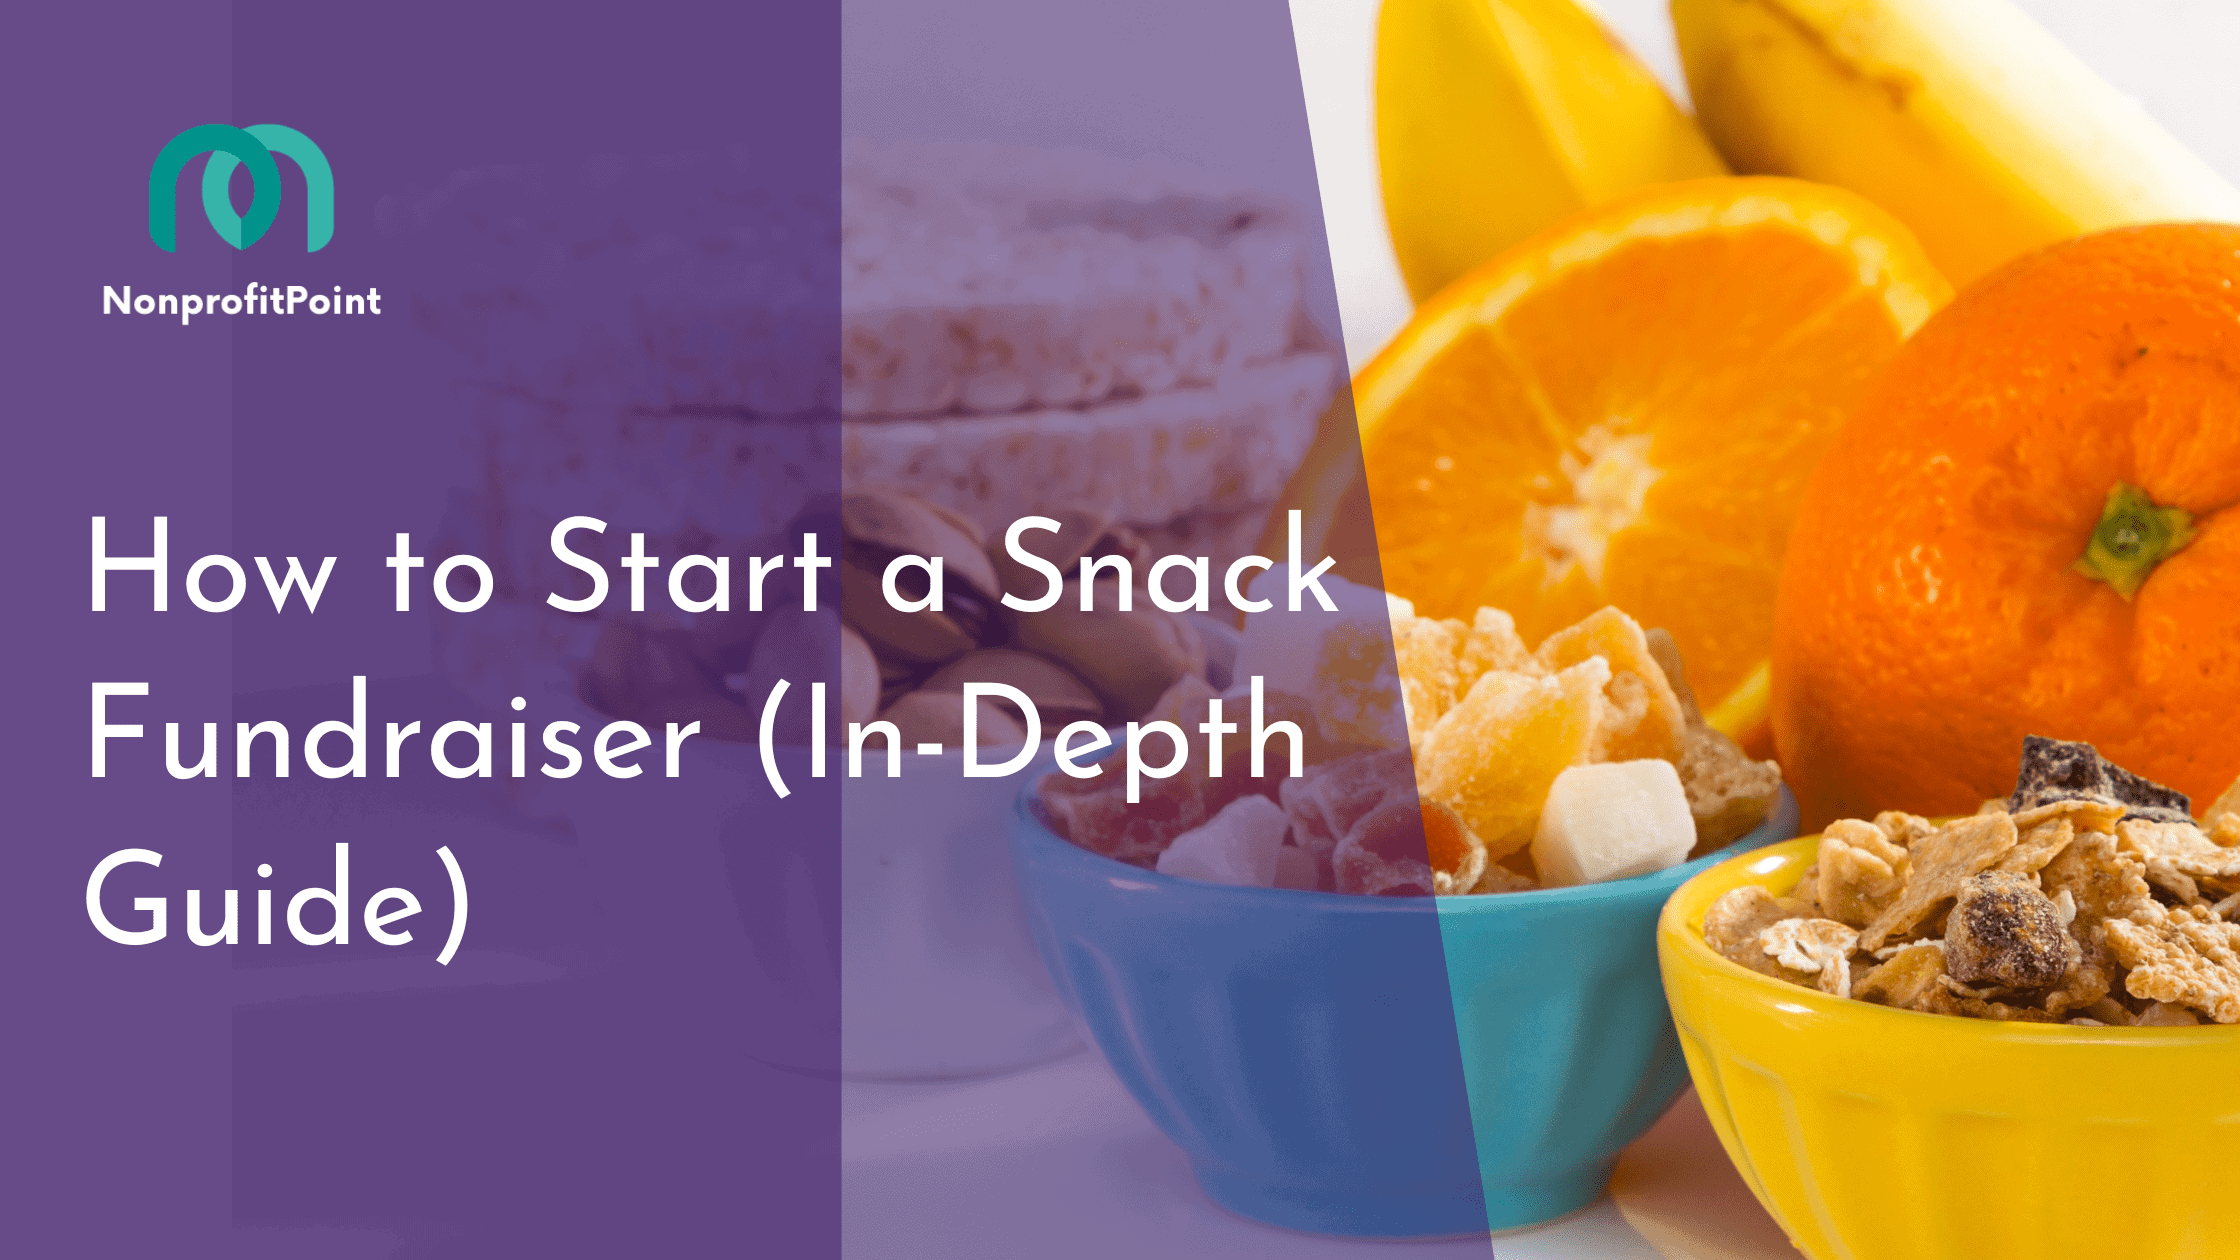 How to Start a Snack Fundraiser (In-Depth Guide)